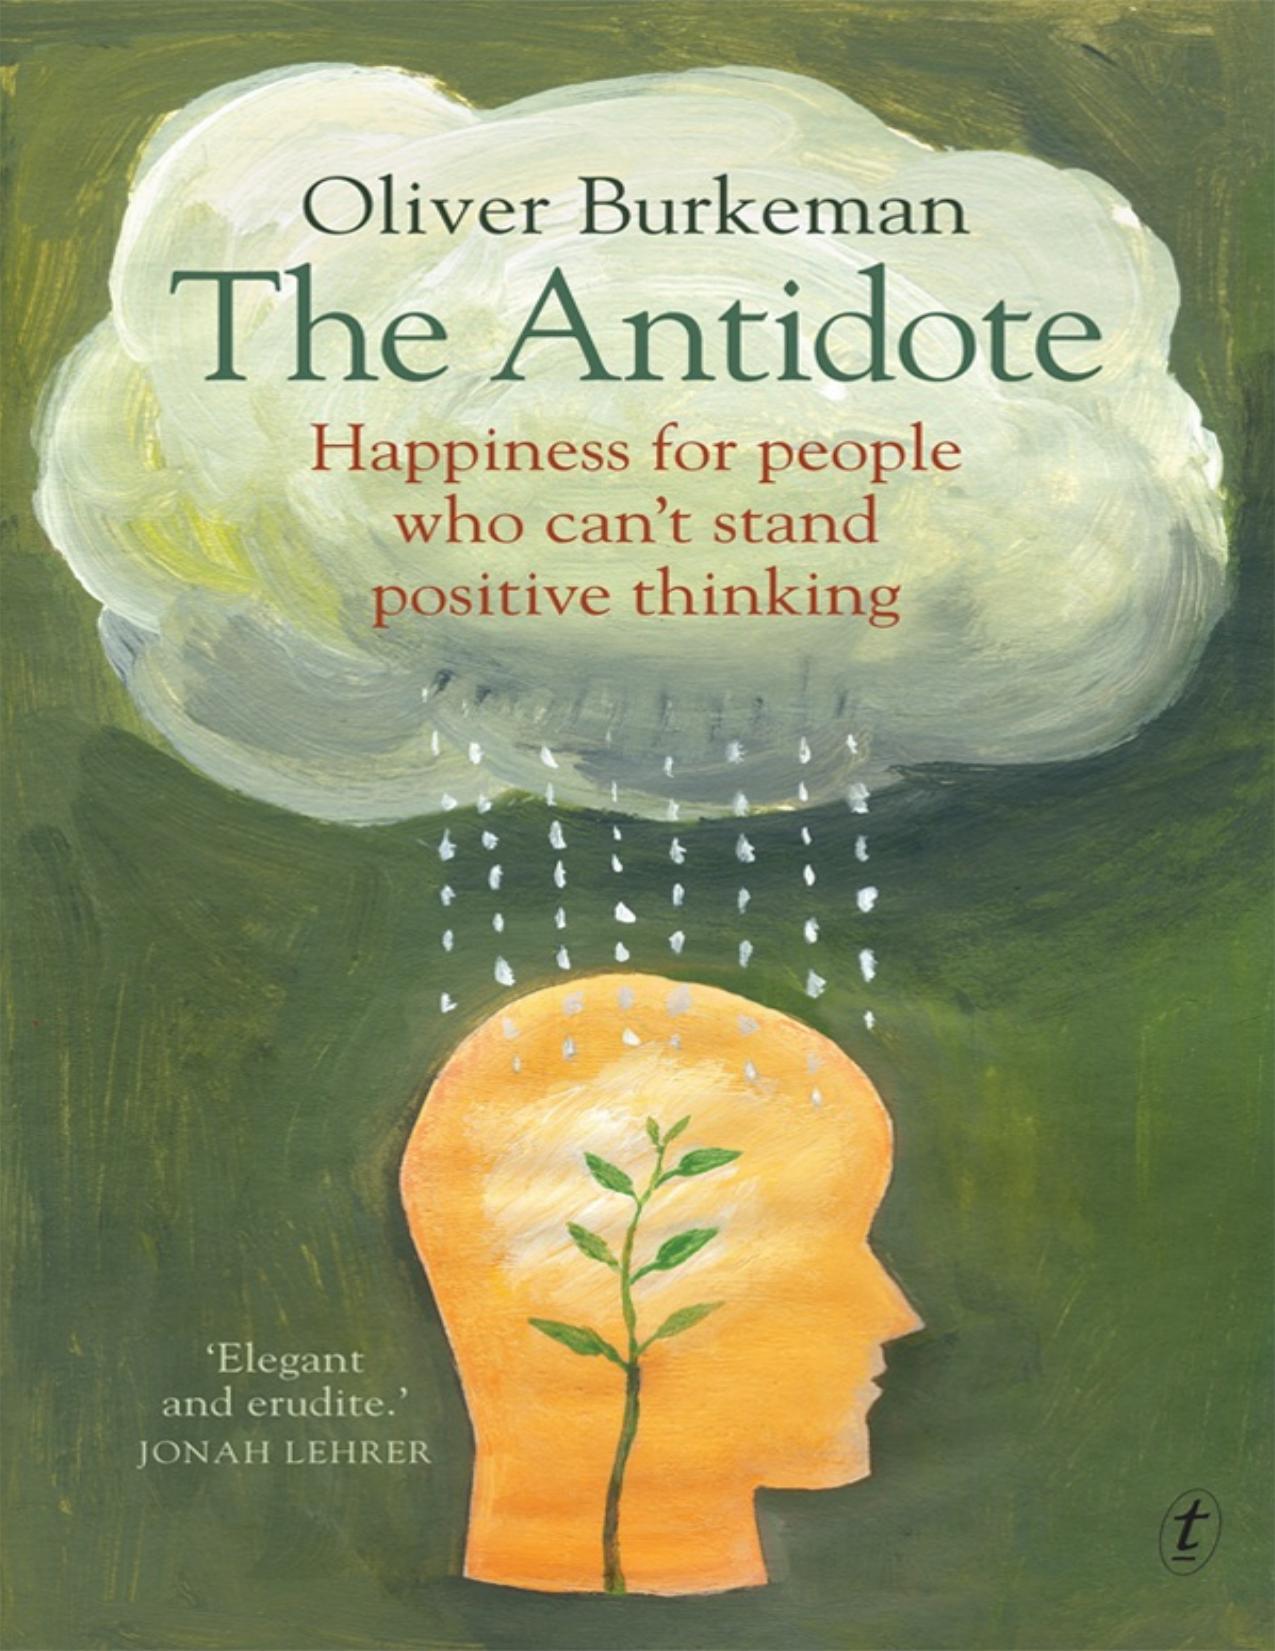 The Antidote by Oliver Burkeman